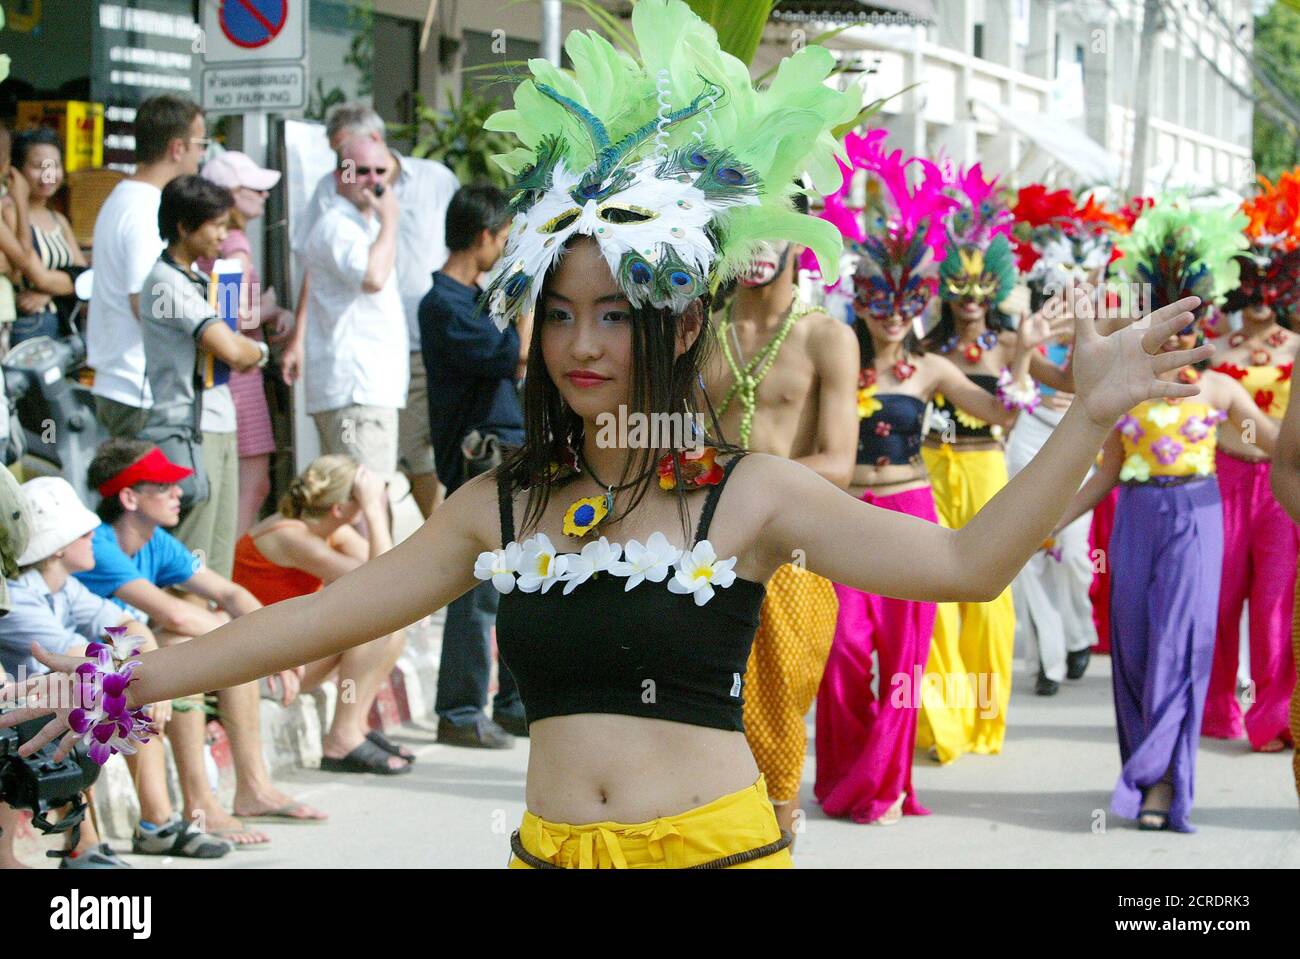 Thai ladies parade down a street in colourful dresses during the opening ceremony of the Samui Carnival 2003, July 18, 2003 in one of the tourist areas on Samui island in Surat Thani province, about 800 km (500 miles) south of Bangkok. The three day ceremony is the first ever island carnival in Asia and aims to stimulate the Thai tourism industry after the crisis caused by the SARS virus outbreak. REUTERS/Sukree Sukplang Stock Photo